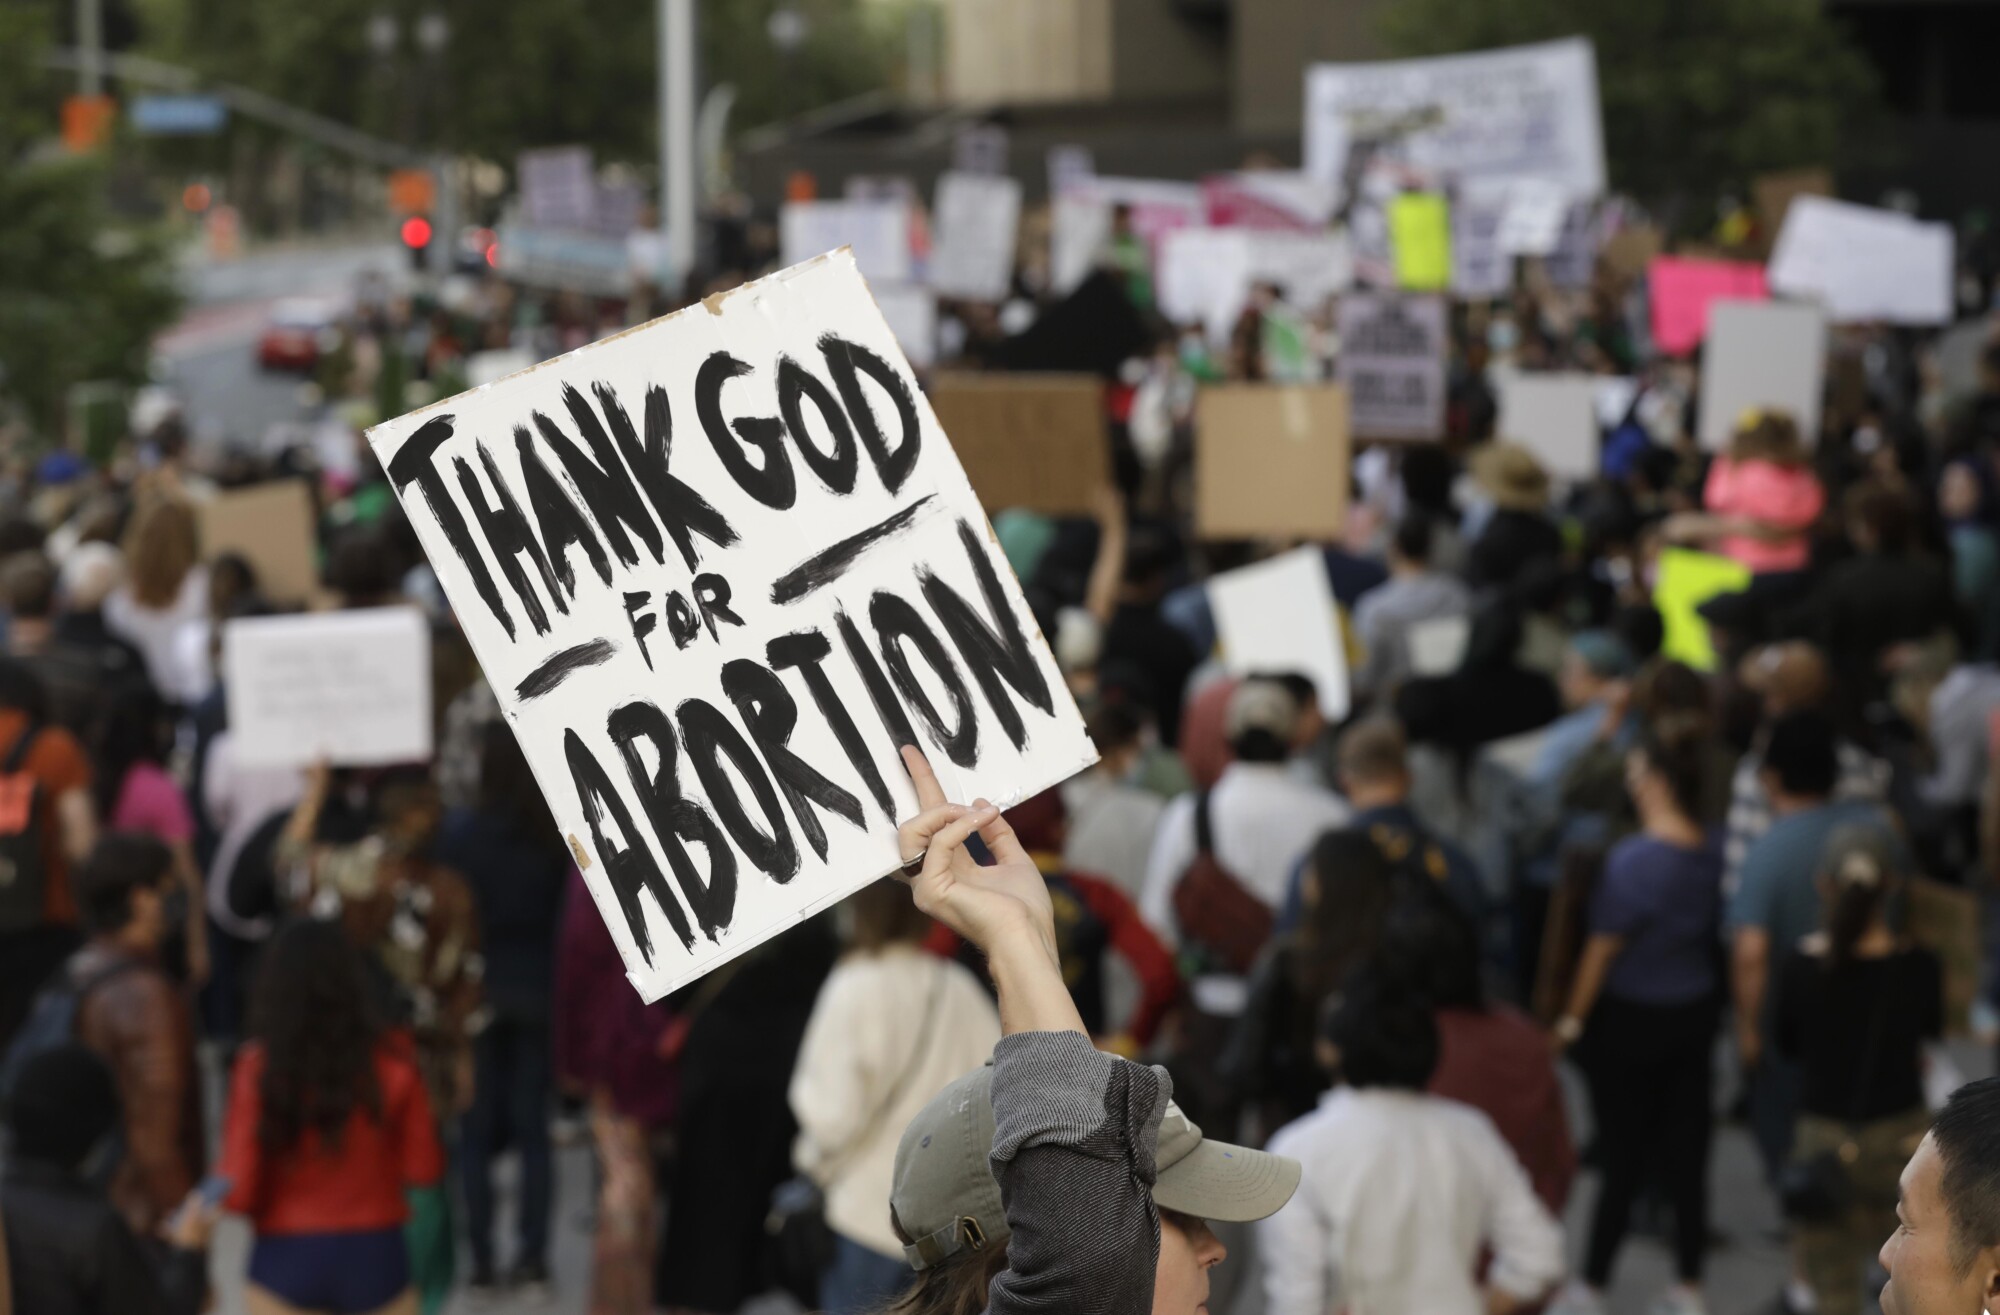 A protester holds up a sign that says "Thank God for abortion"